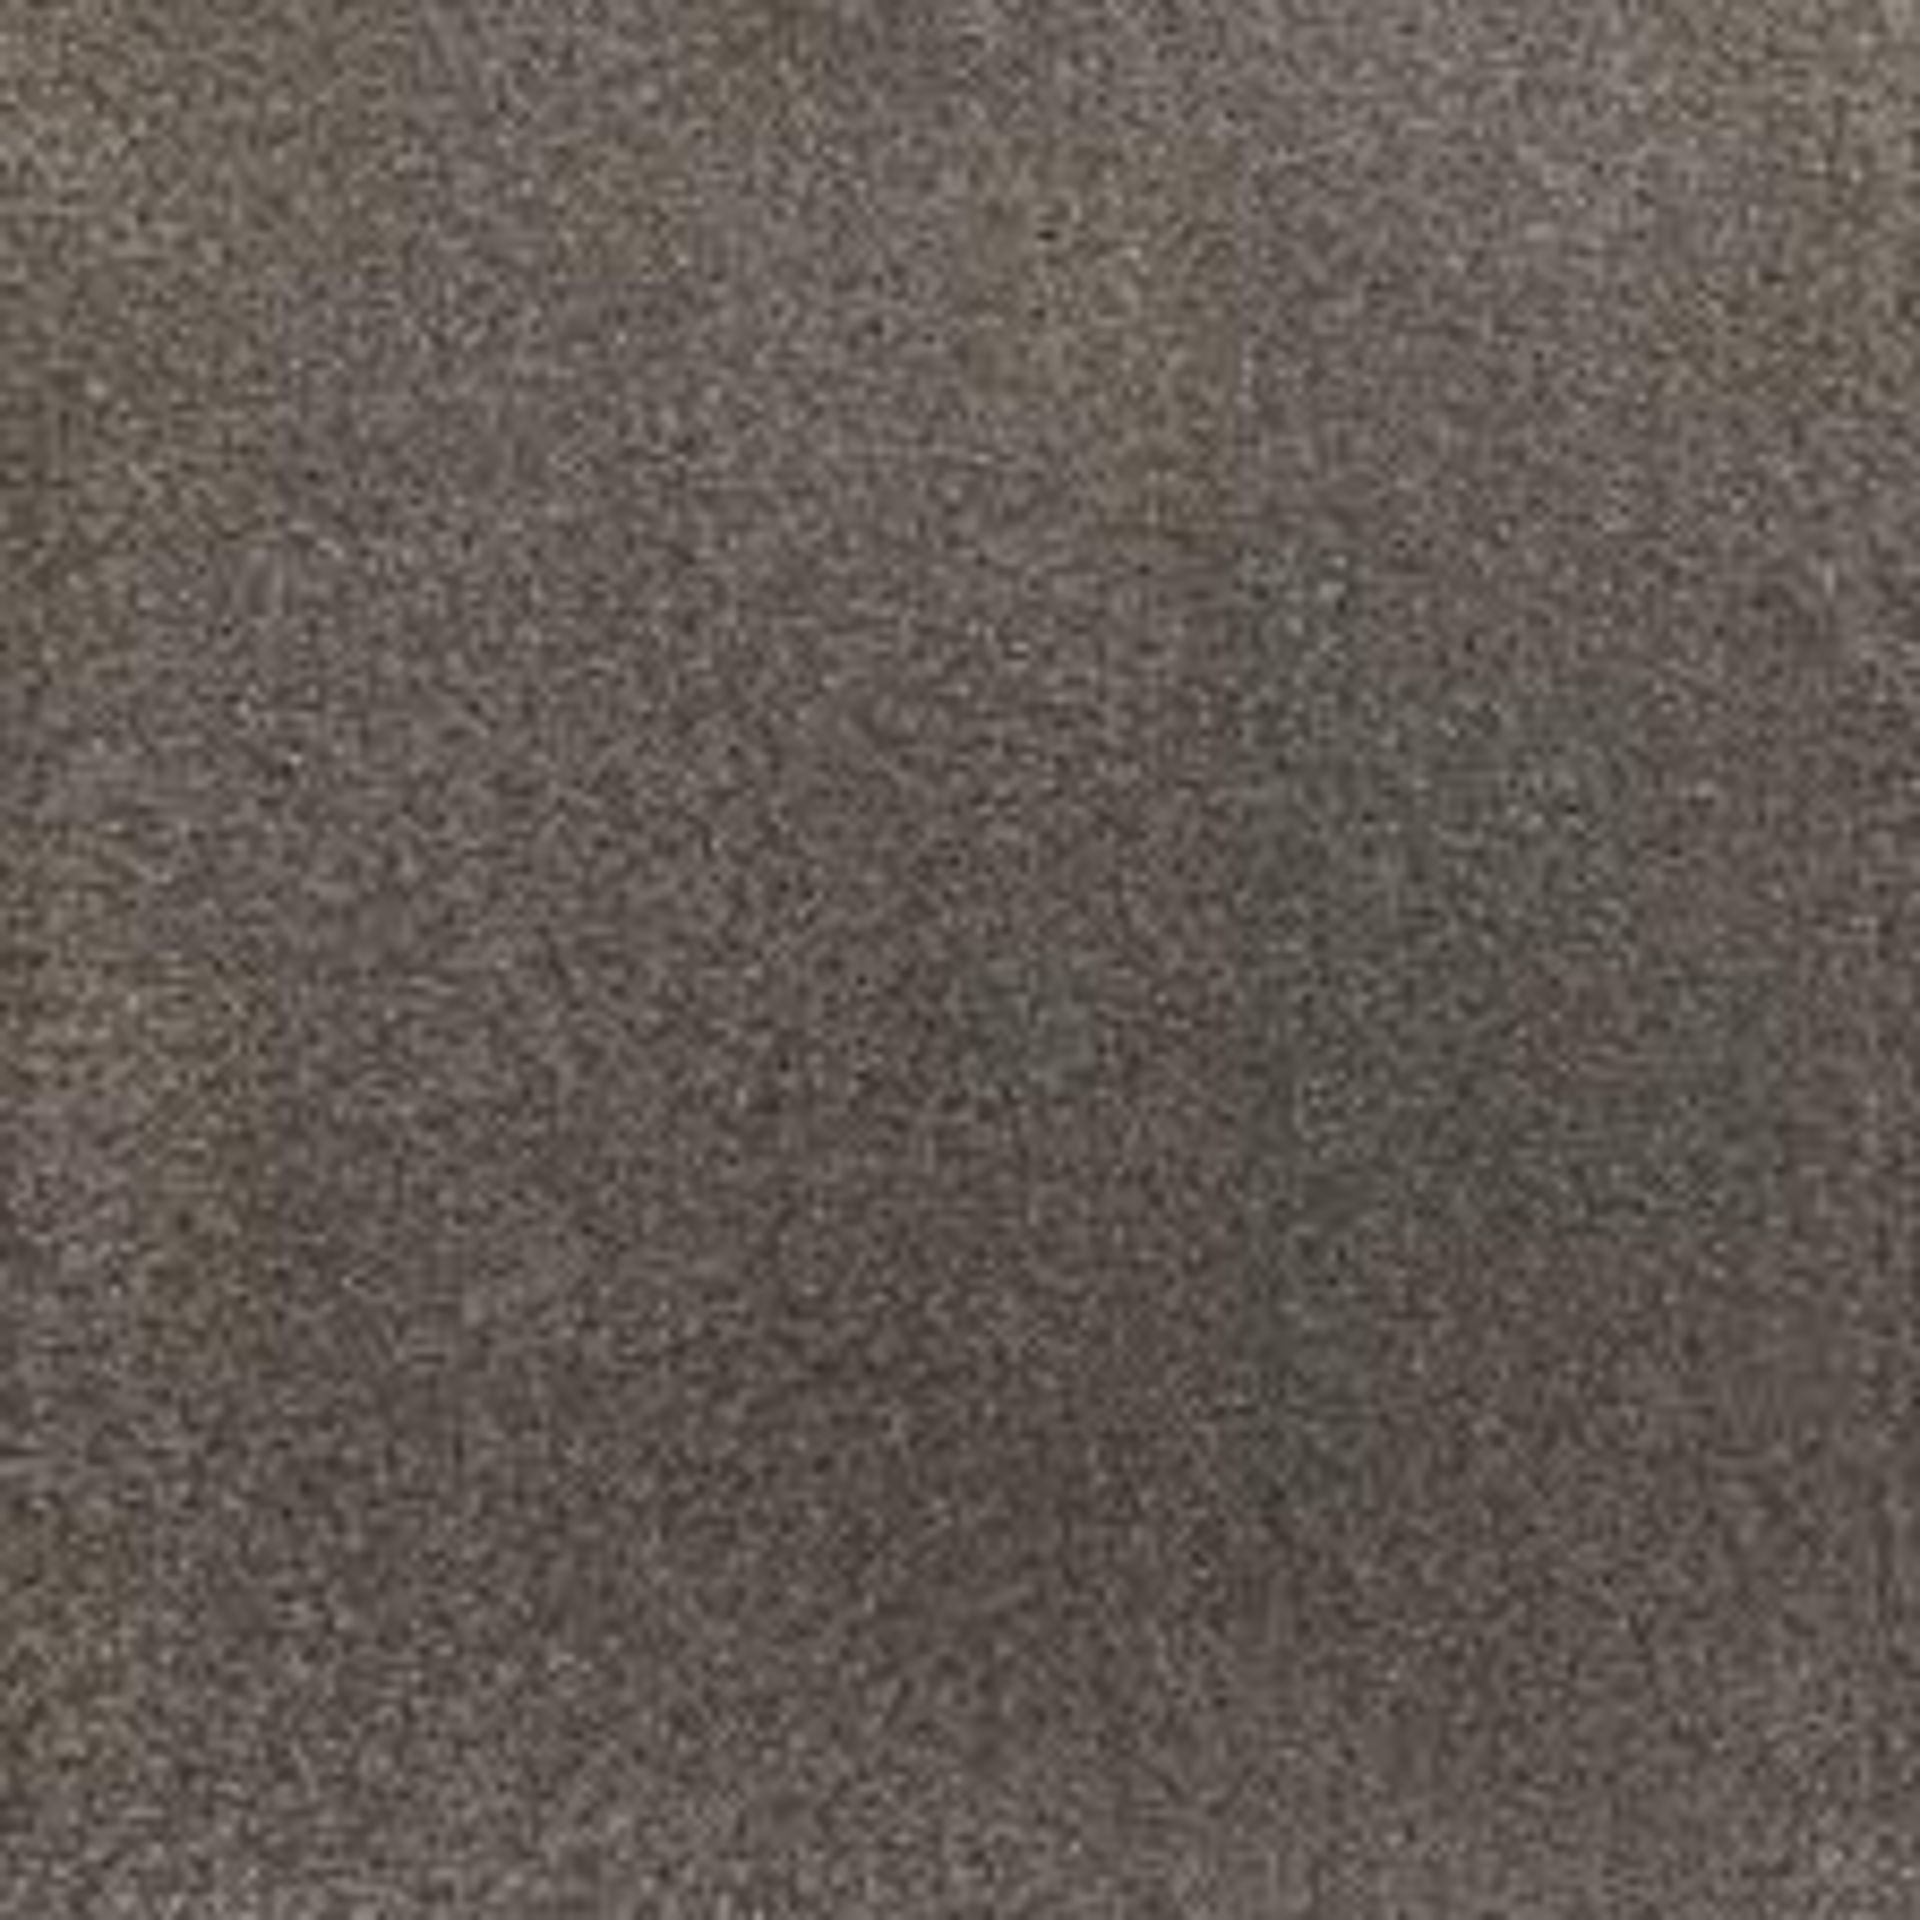 RRP £240 Bagged And Rolled Harrison Twist 75 Granite 4M X 1.48M Carpet (094090) (Appraisals